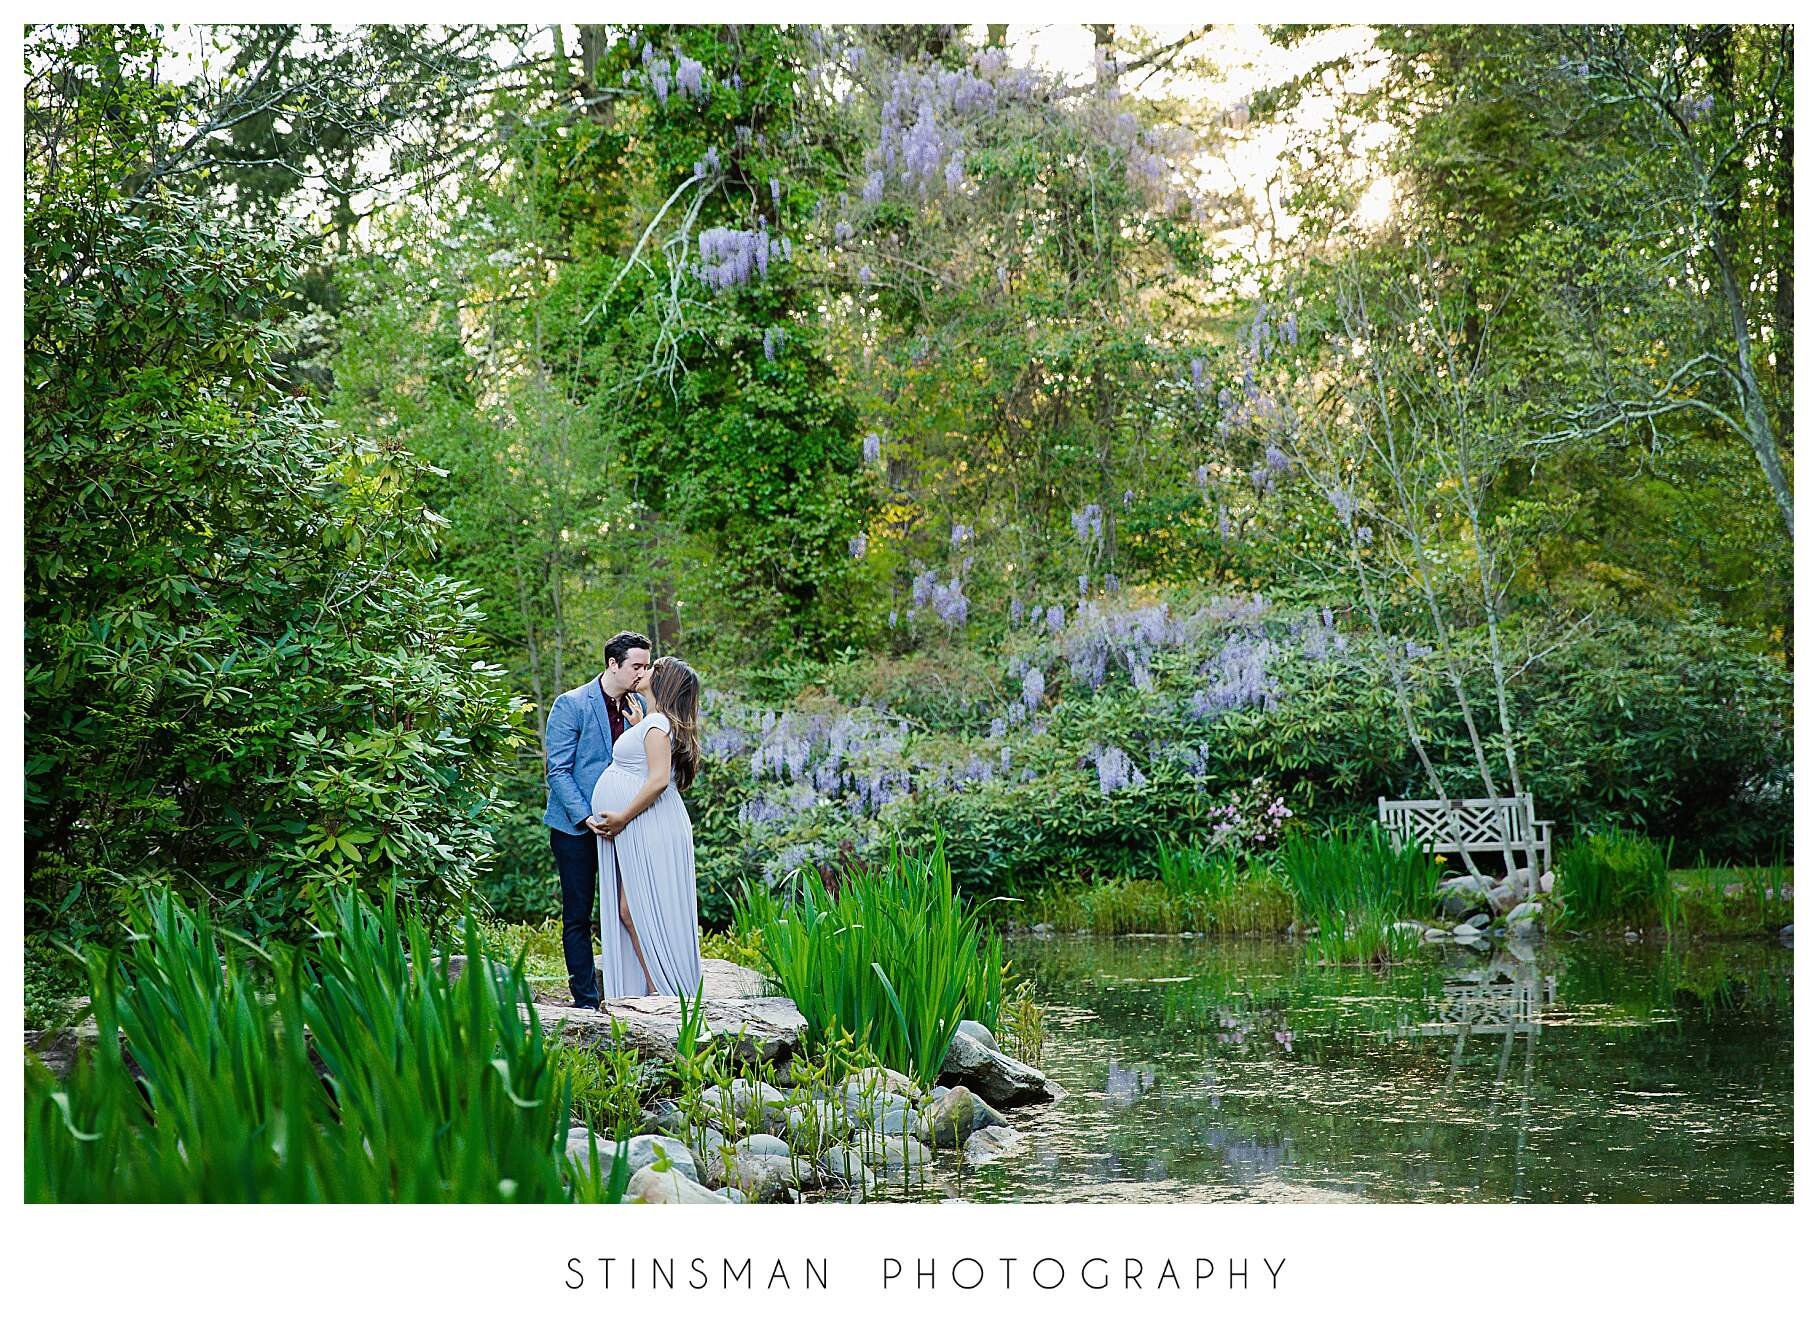 pond-at-sayen-gardens-with-maternity-couple-kissing.jpeg